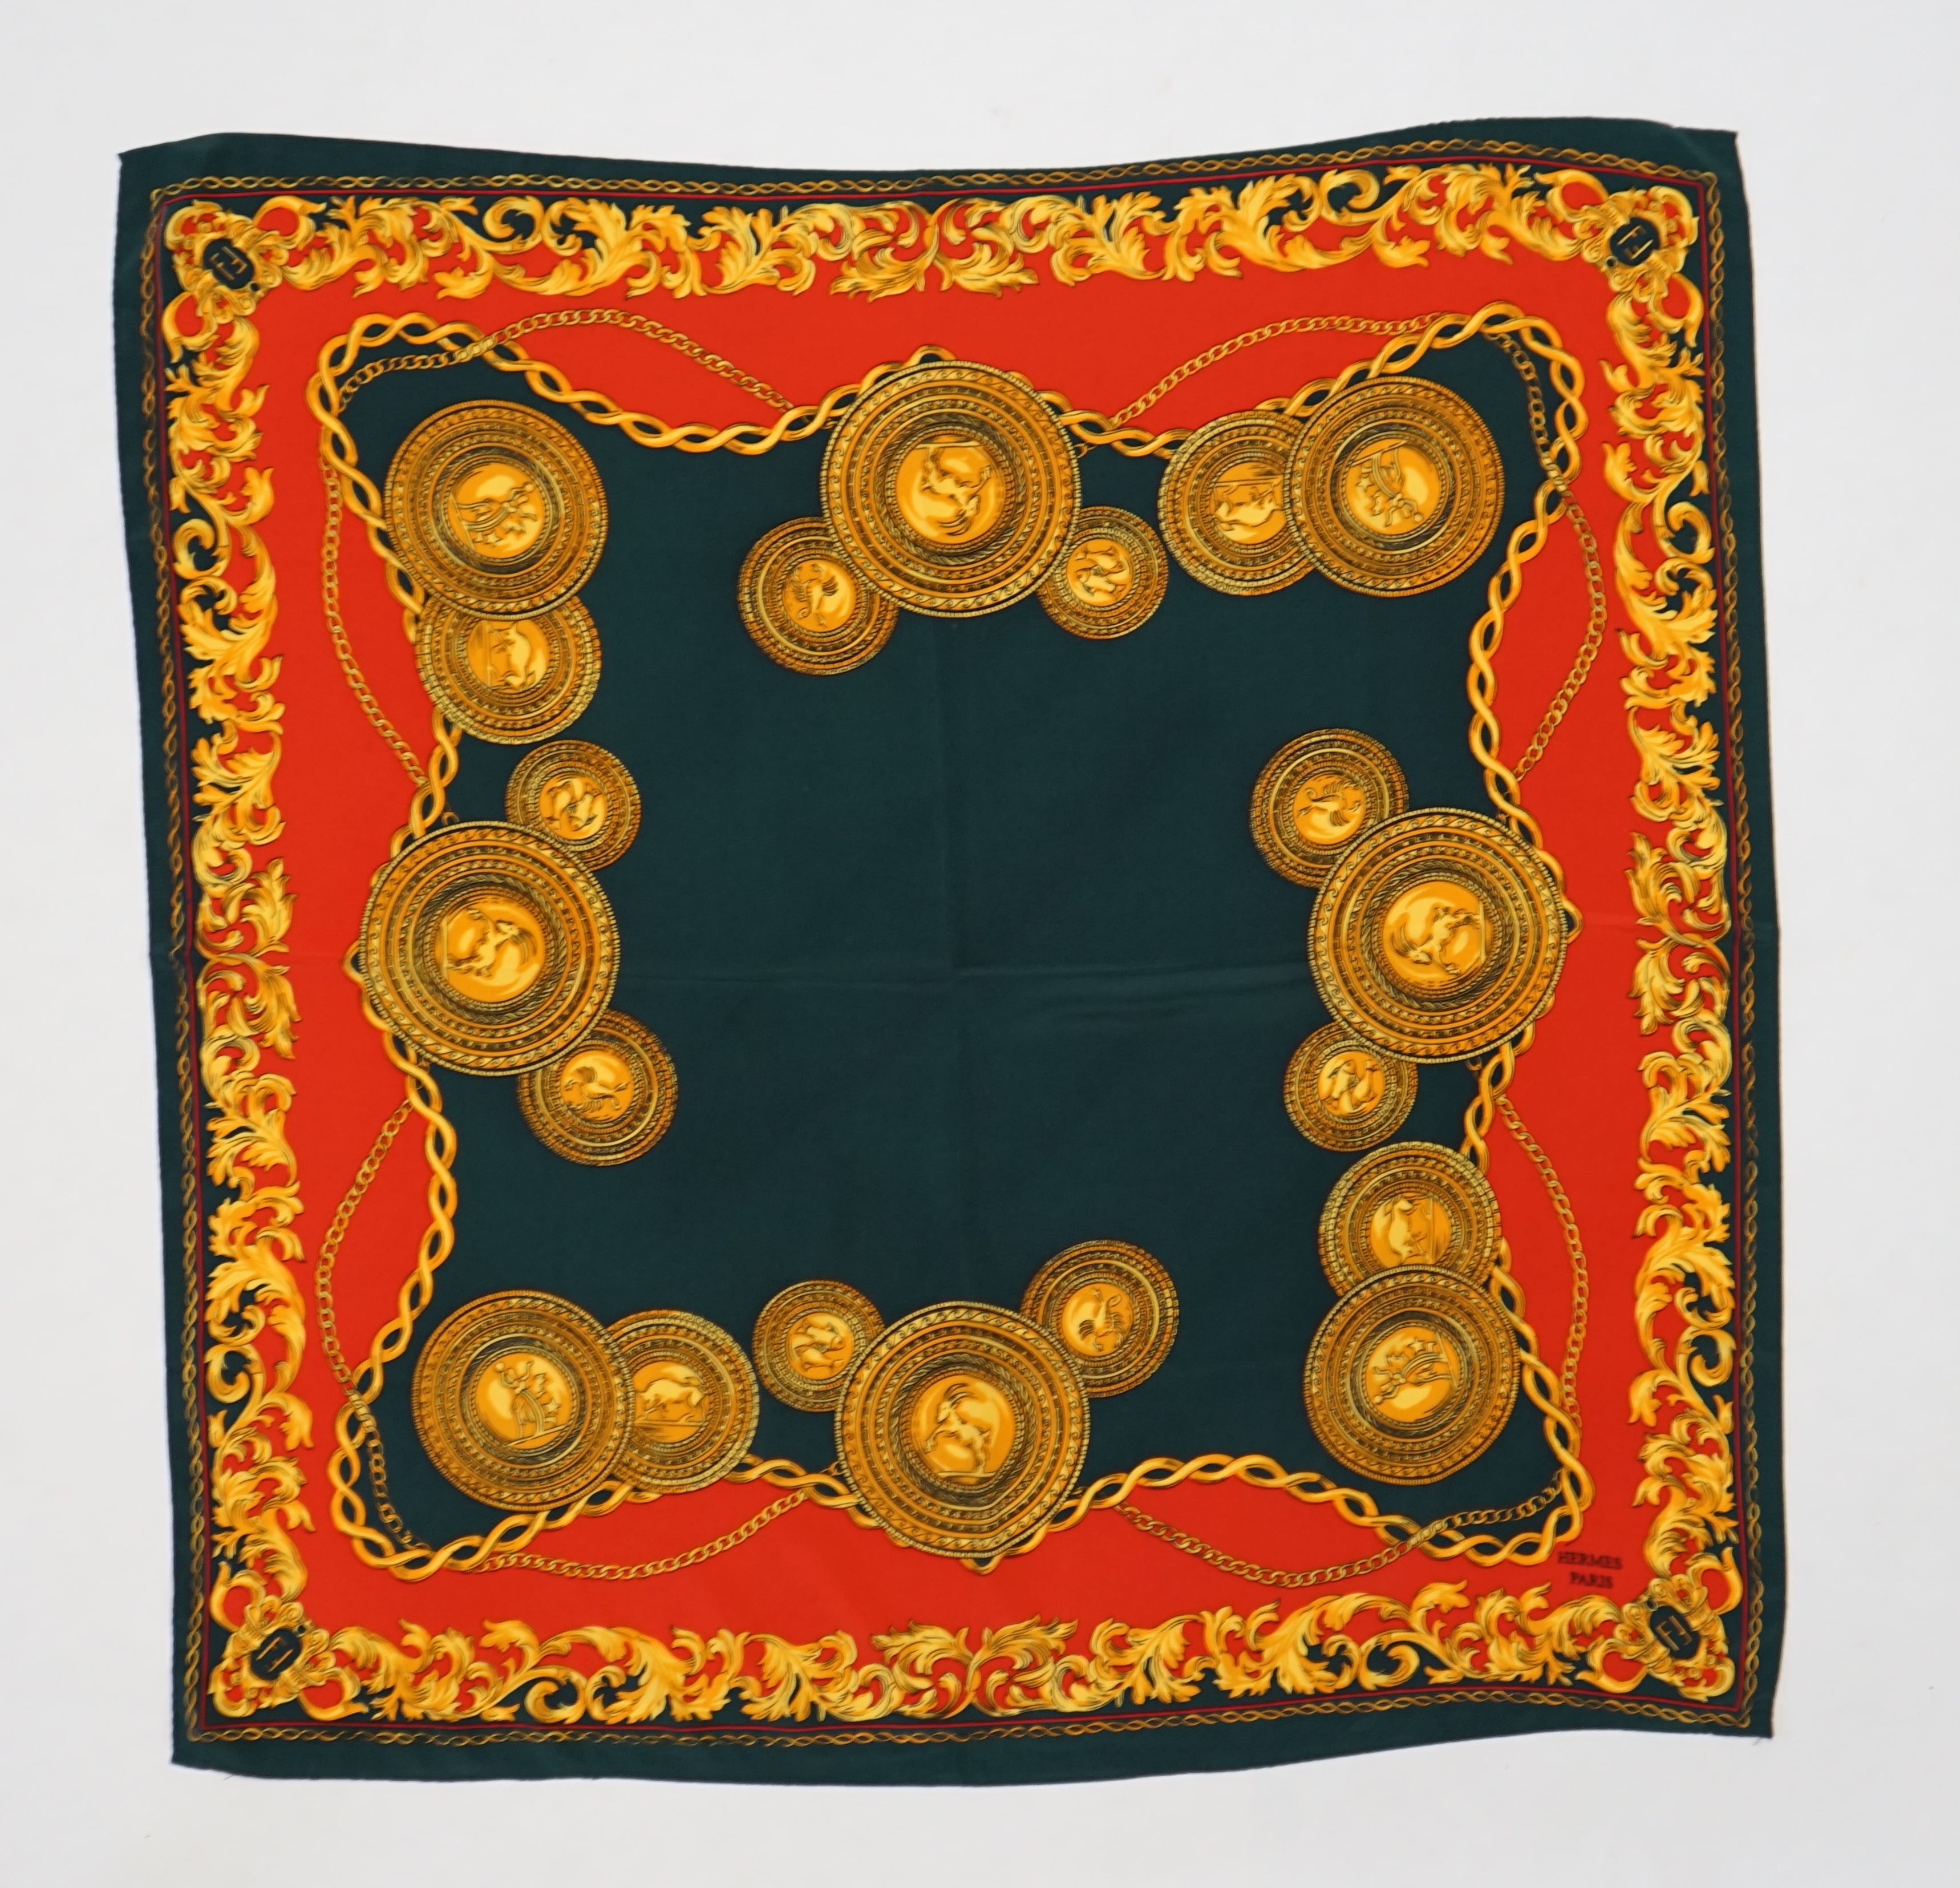 A Hermès silk scarf decorated with gold zodiac sign animals and hybrids, gold foliage and chain design around the edges, 90 x 84cm